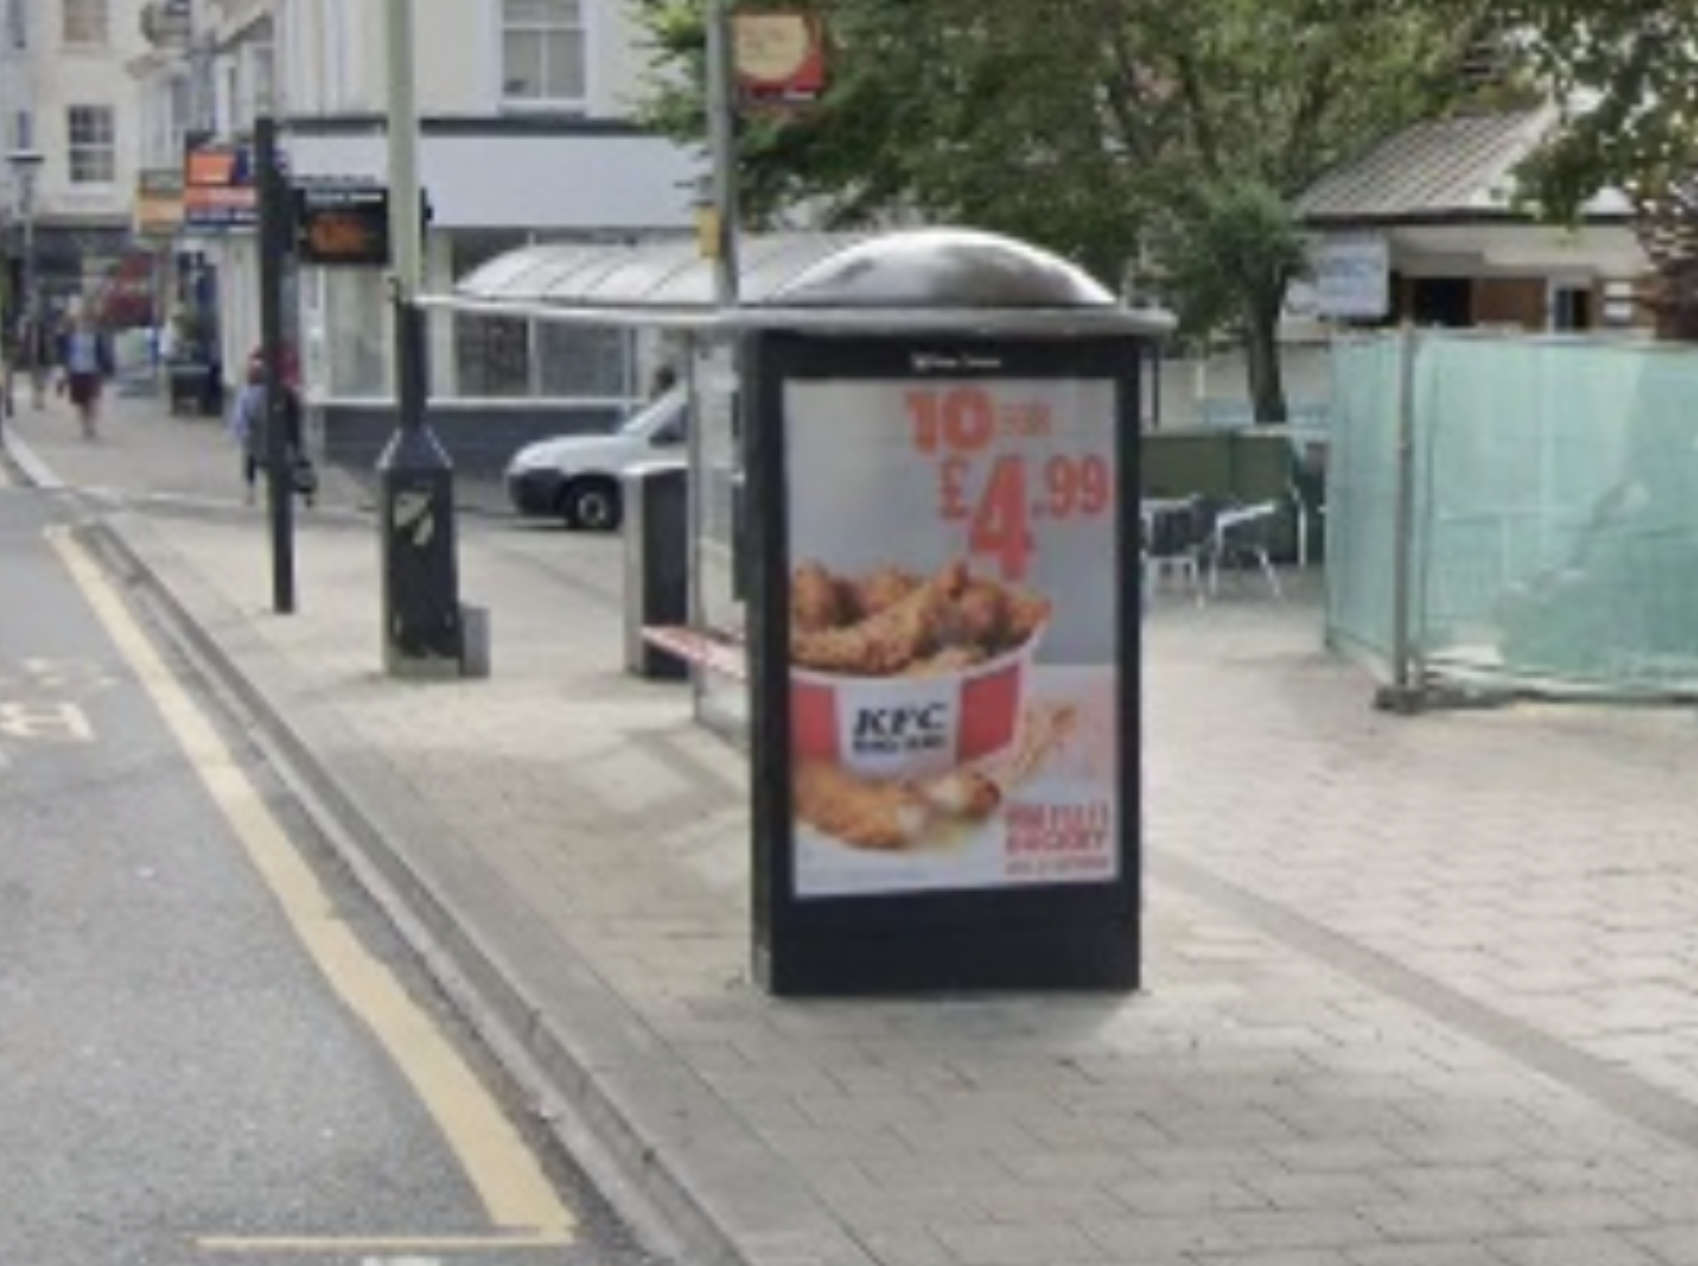 Ban On Junk Food Ads In Brighton Hove Wins Backing Of Health Chiefs 